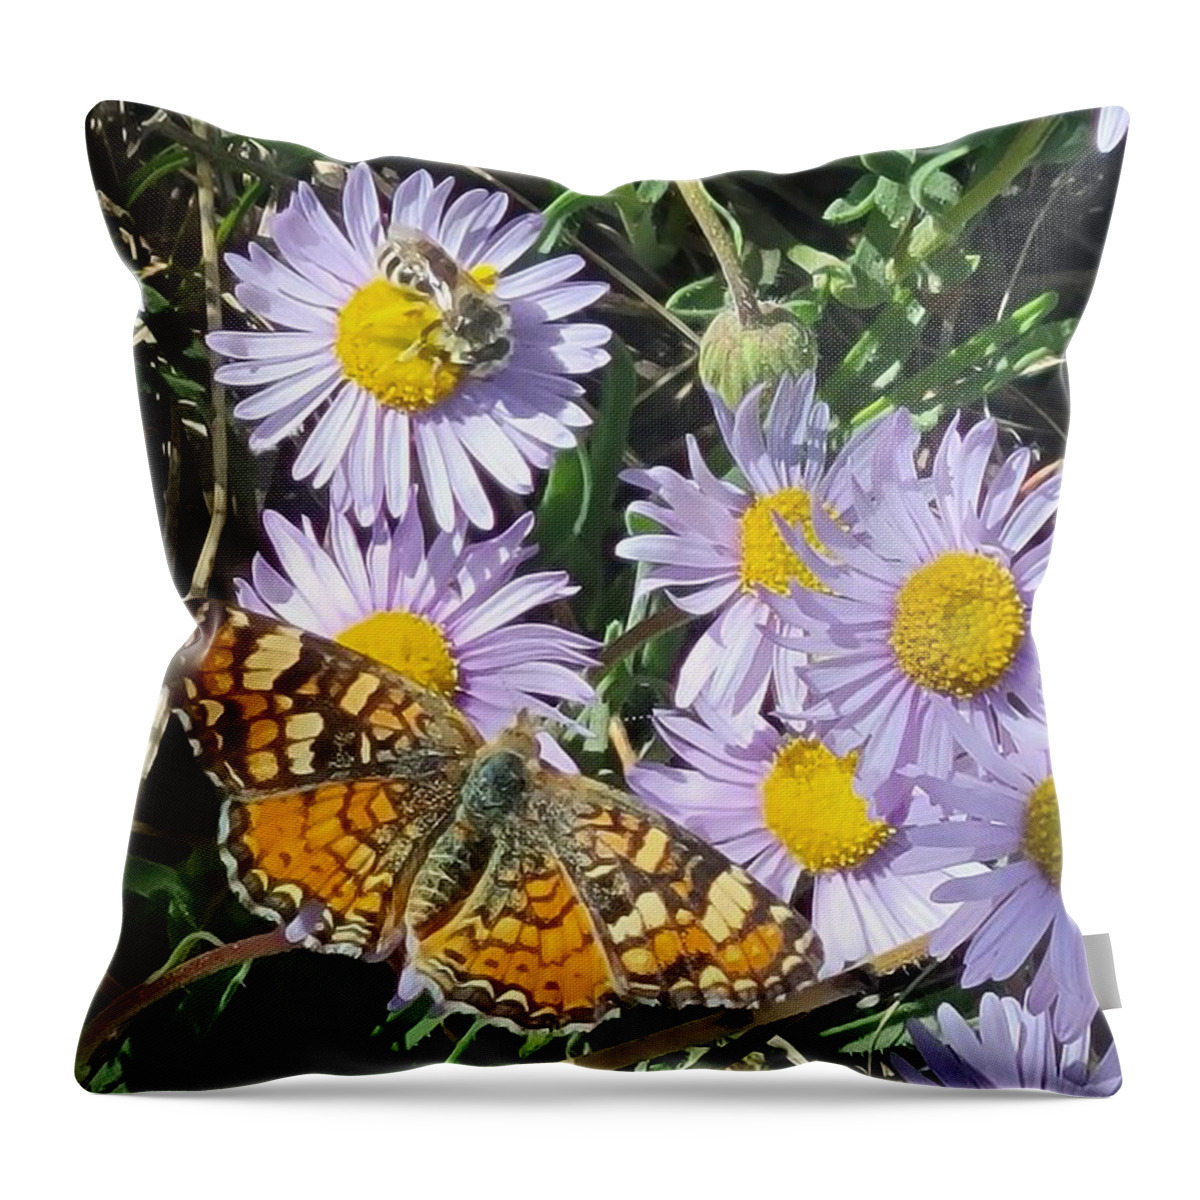 The Feast Throw Pillow featuring the photograph The Feast by Jennifer Forsyth